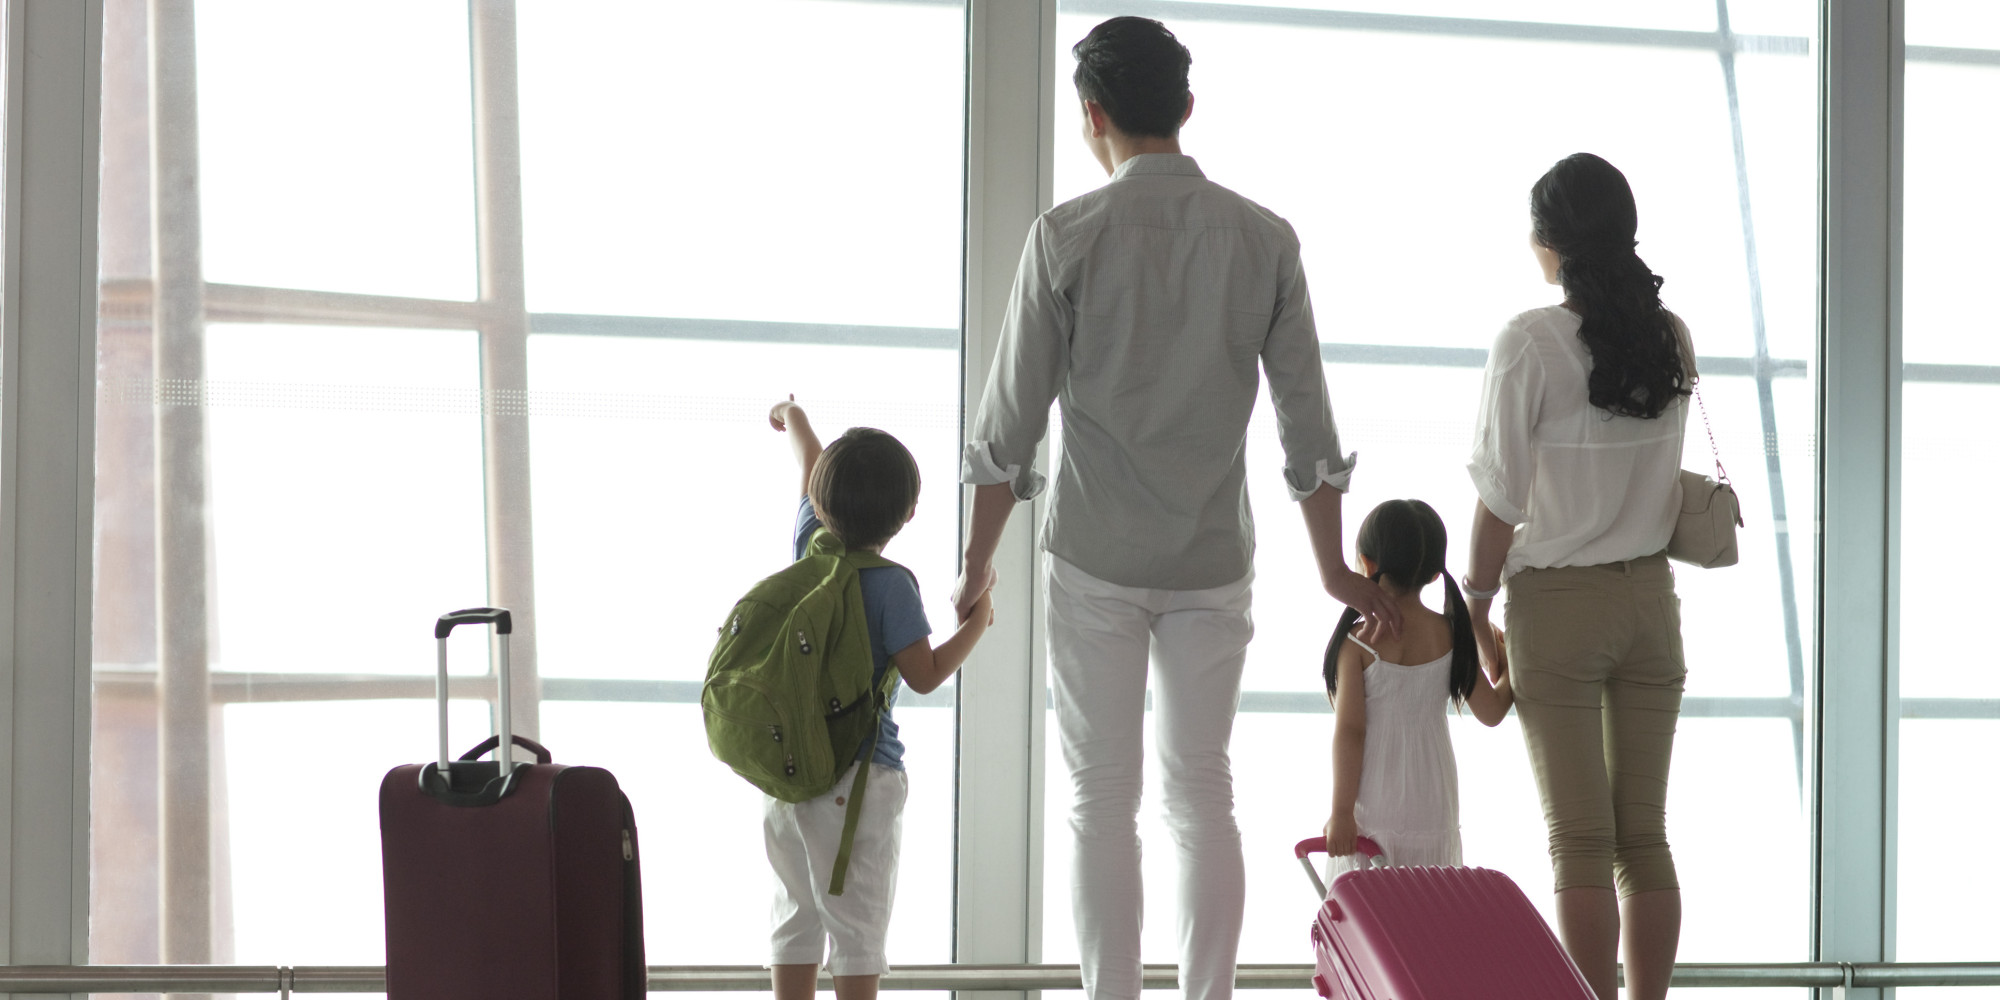 Louis Habash: Family Travel May Not Be So Fun for the Parents